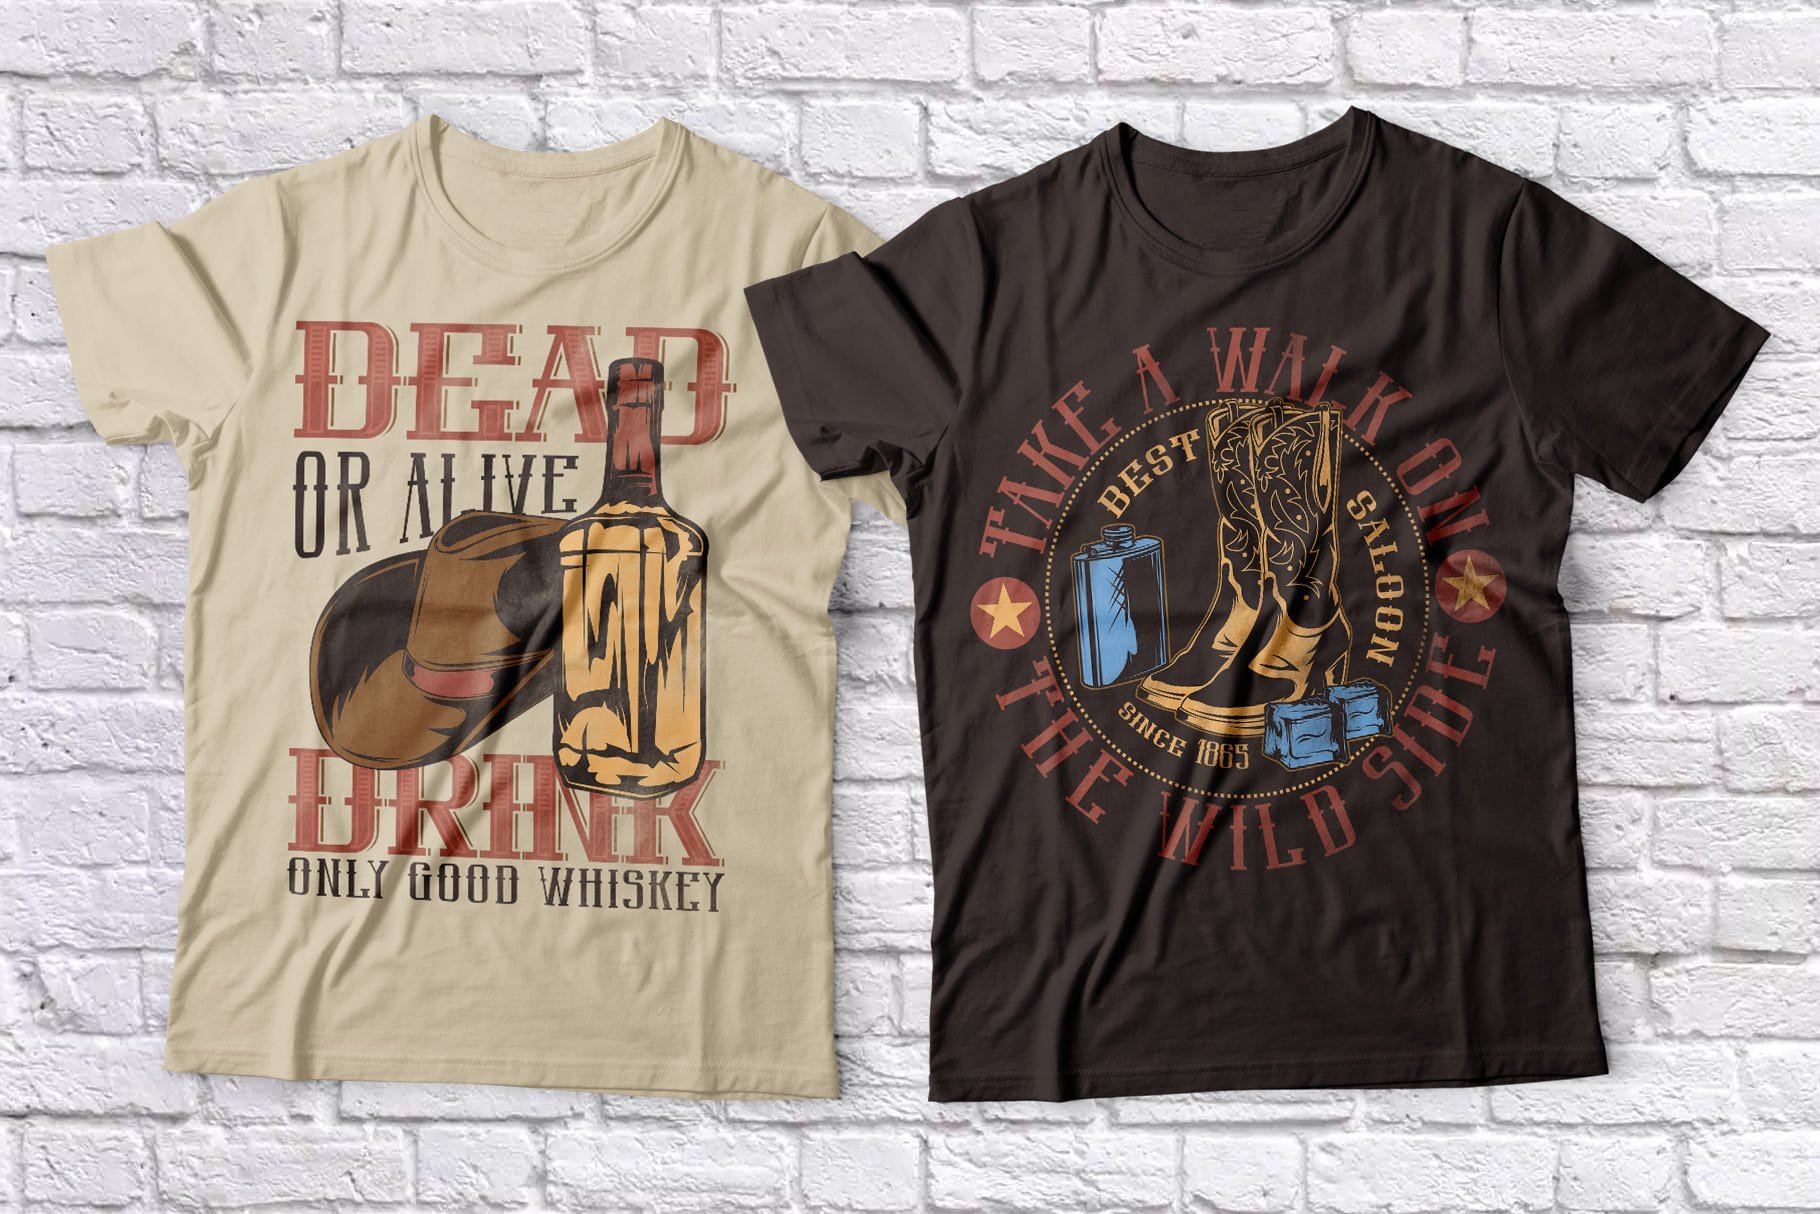 Themed t-shirts with whiskey and cowboy boots.